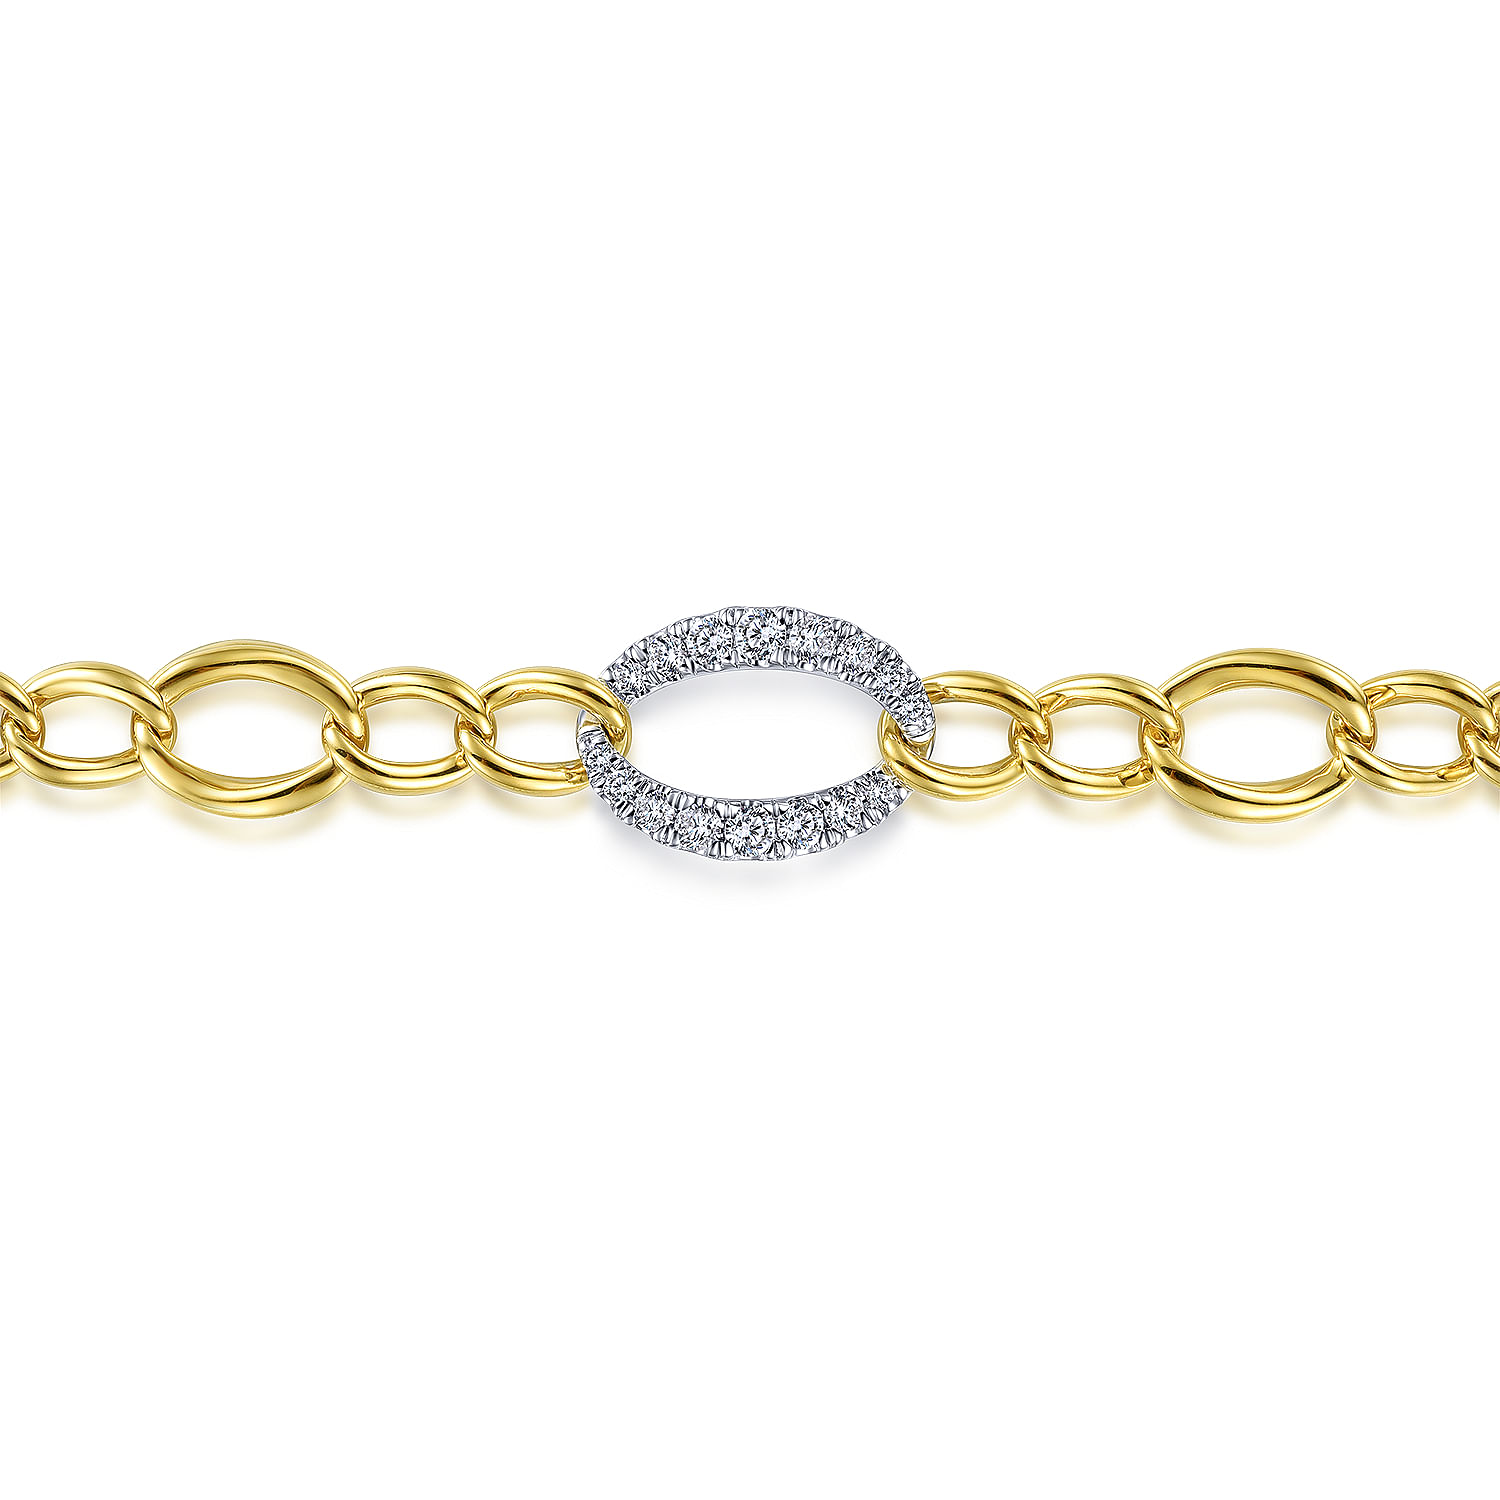 14K Yellow-White Gold Chain Link Bracelet with Diamond Pavé Oval Link Stations